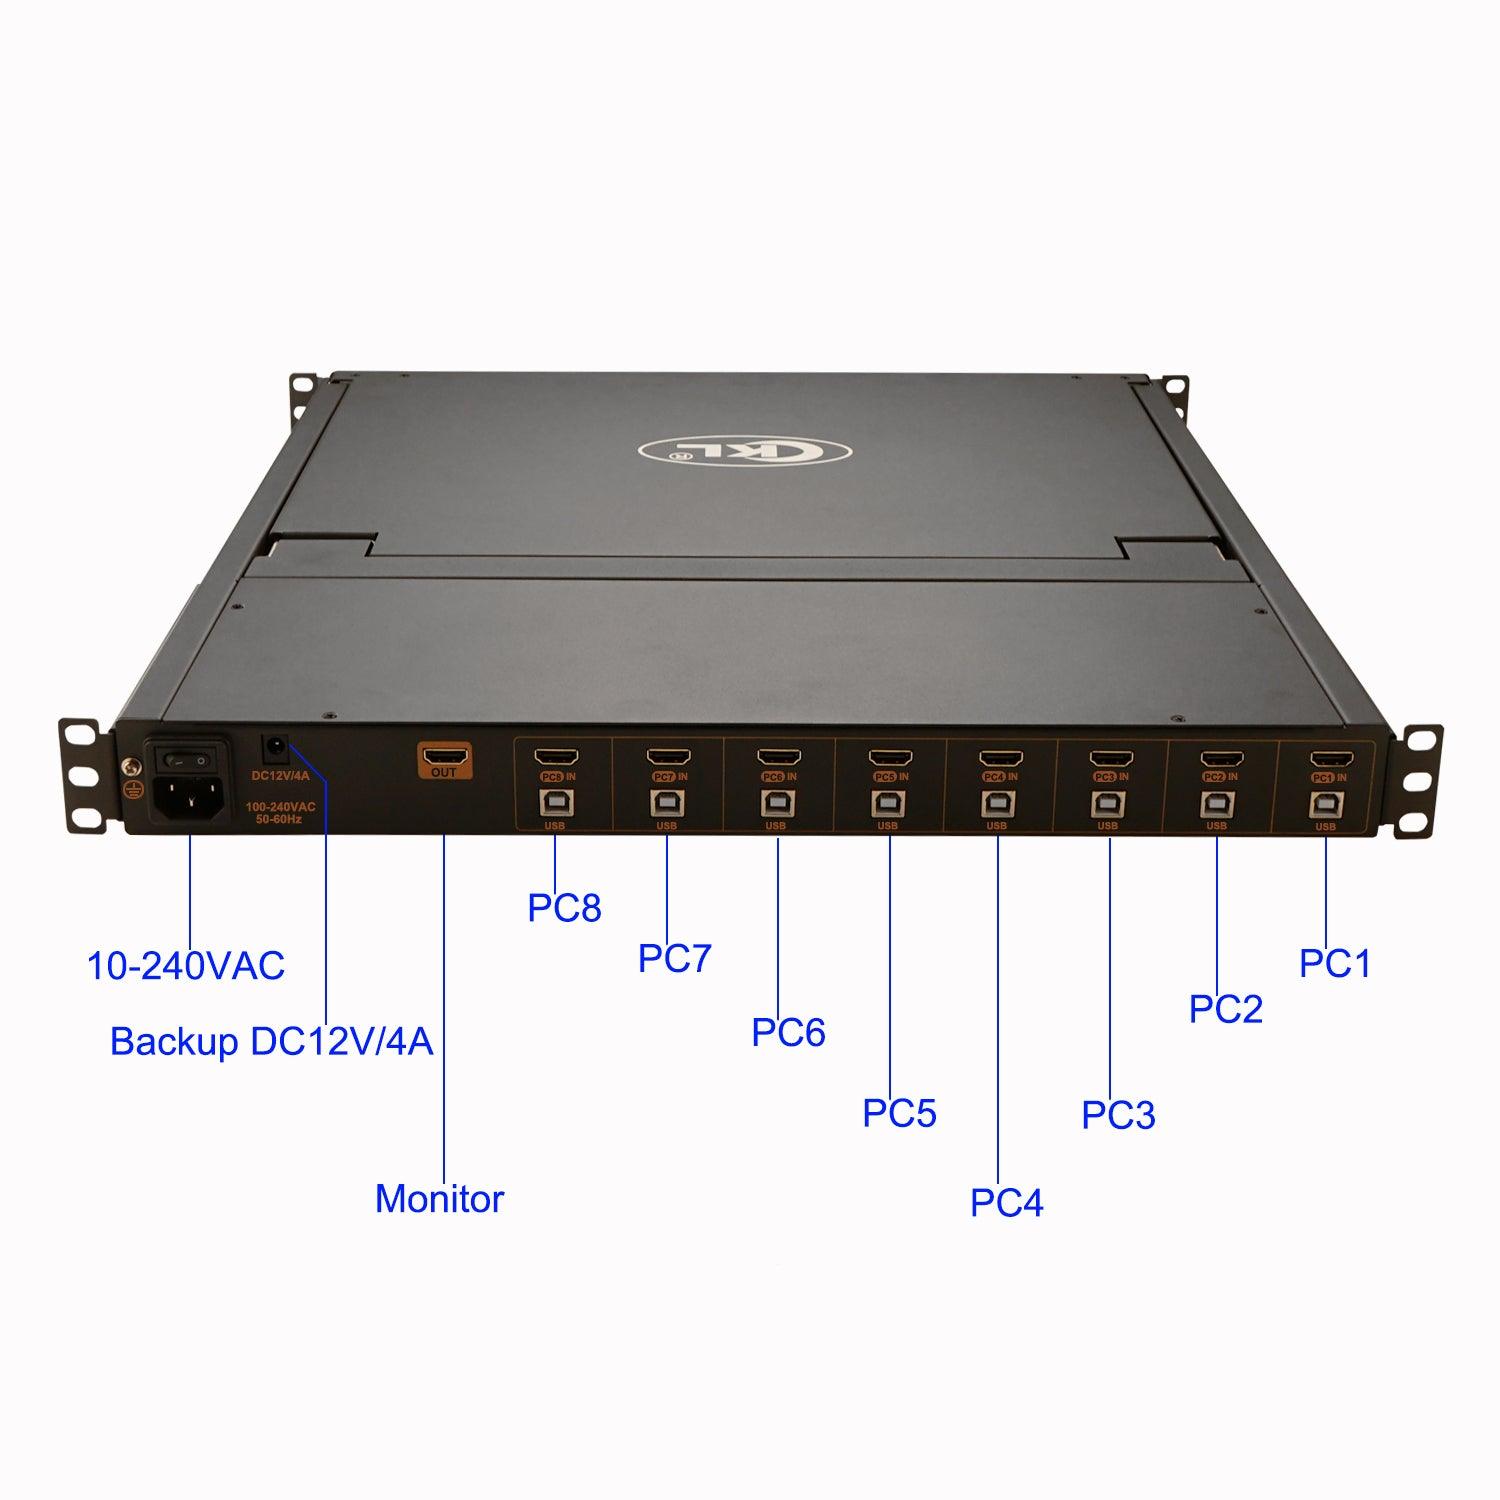 8 Port LCD KVM Switch HDMI 1080P for Computers and Servers CKL-1708H - CKL KVM Switches